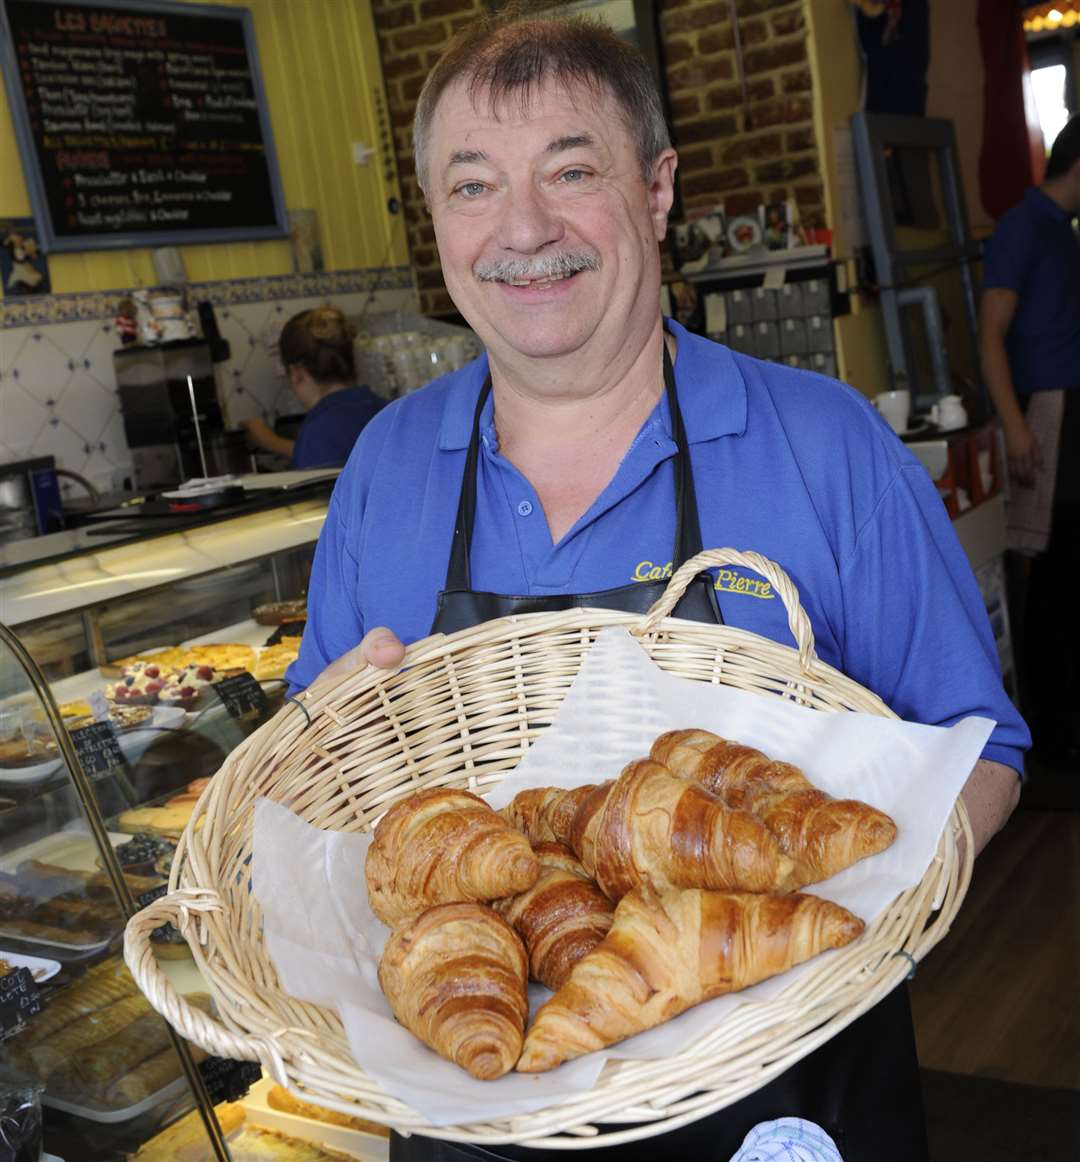 Michel with some of his famous pastries